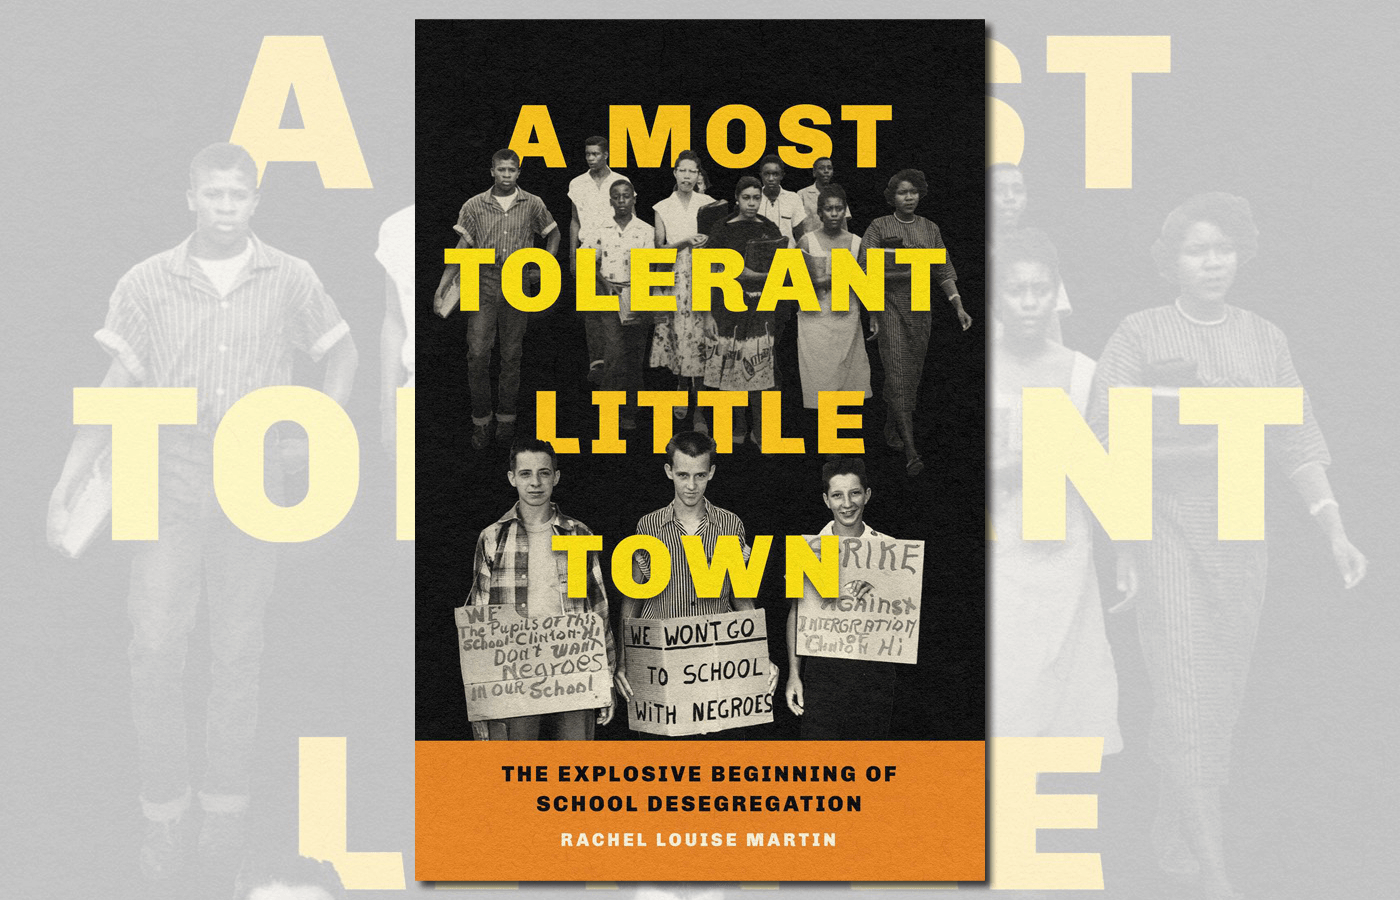 Book cover of "A Most Tolerant Little Town"